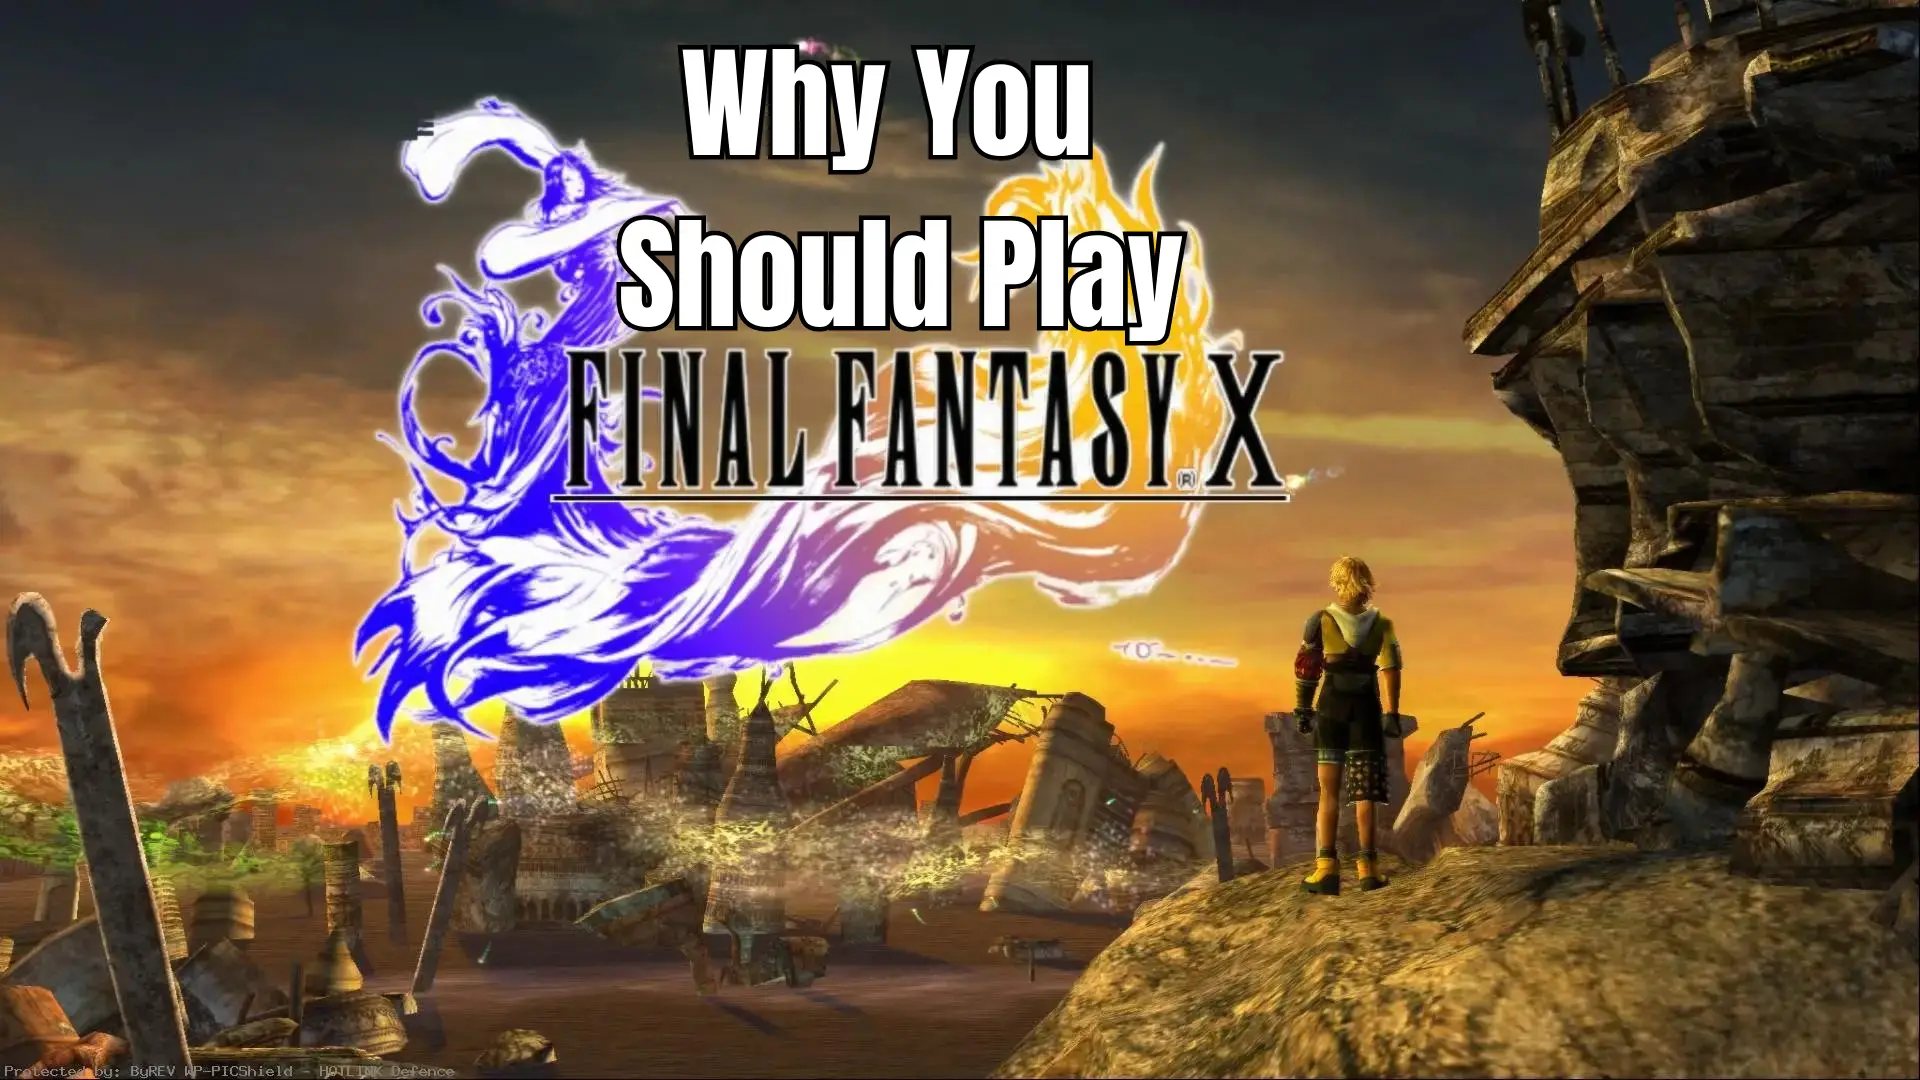 What Are The Reasons for Playing Final Fantasy X?